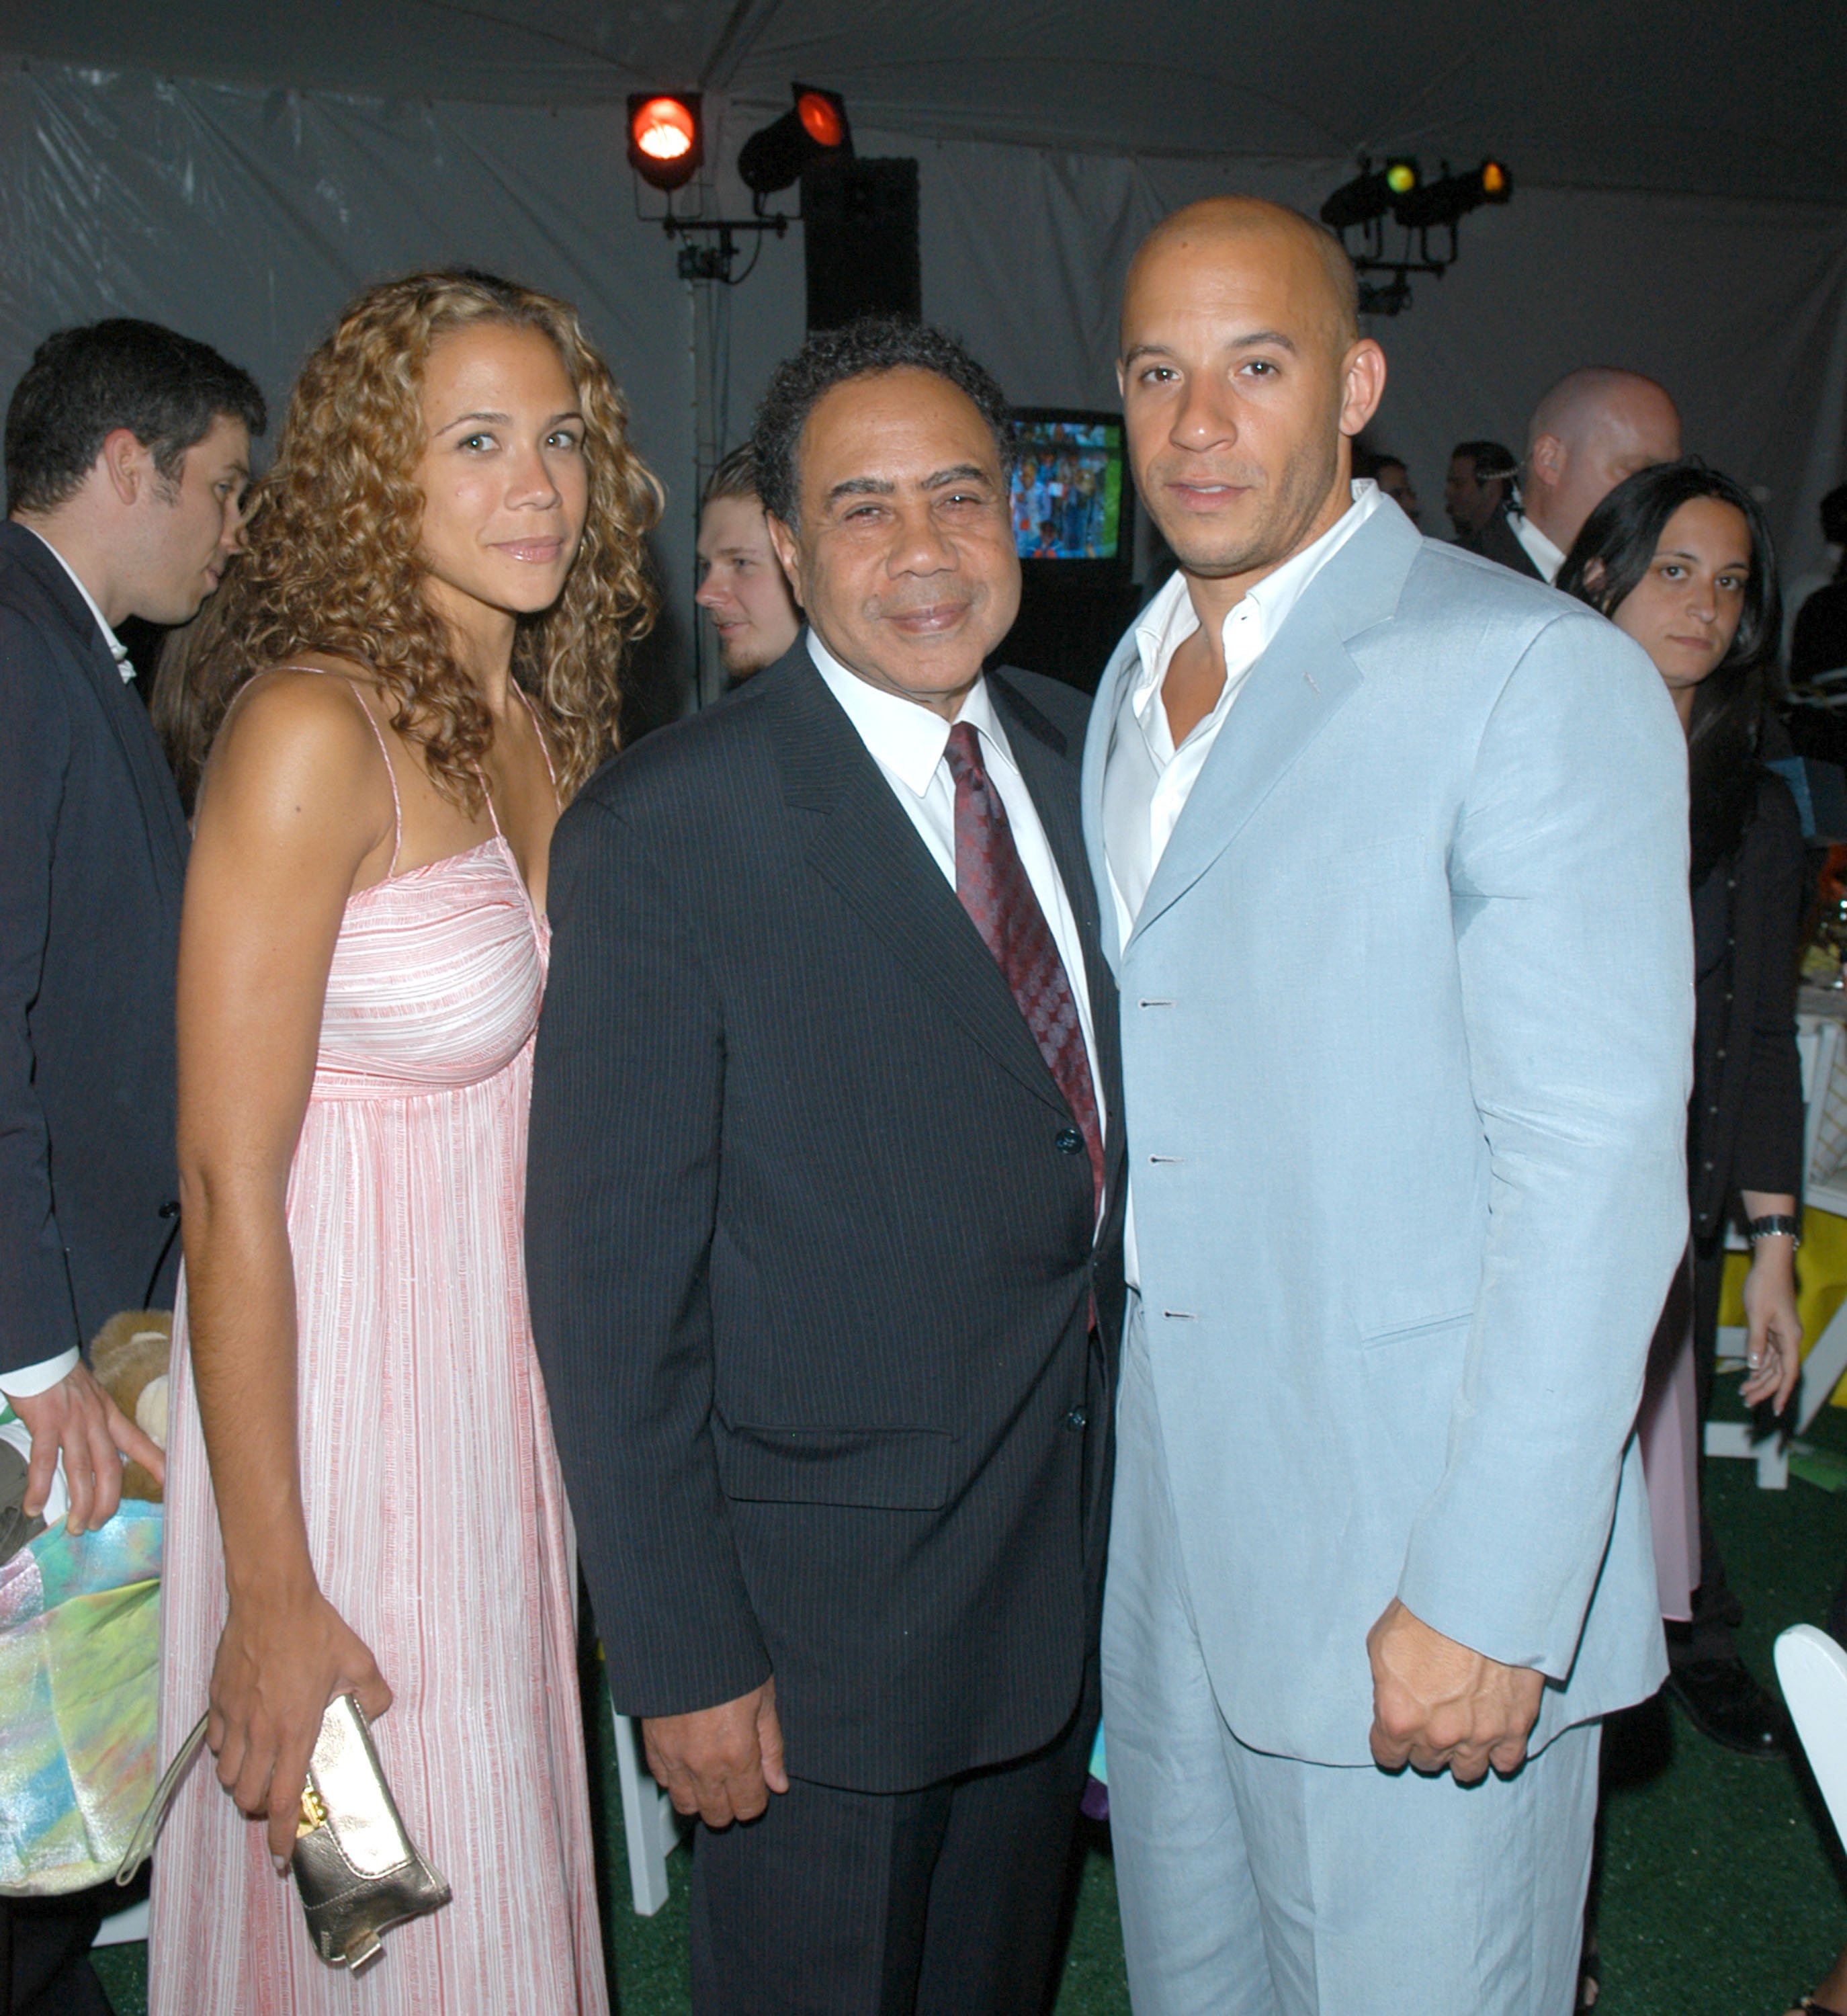 Vin Diesel with his sister and his father during "Build-A-Bear Workshop" at Fresh Air Fund Spring Gala 2005, in New York City. | Source: Getty Images